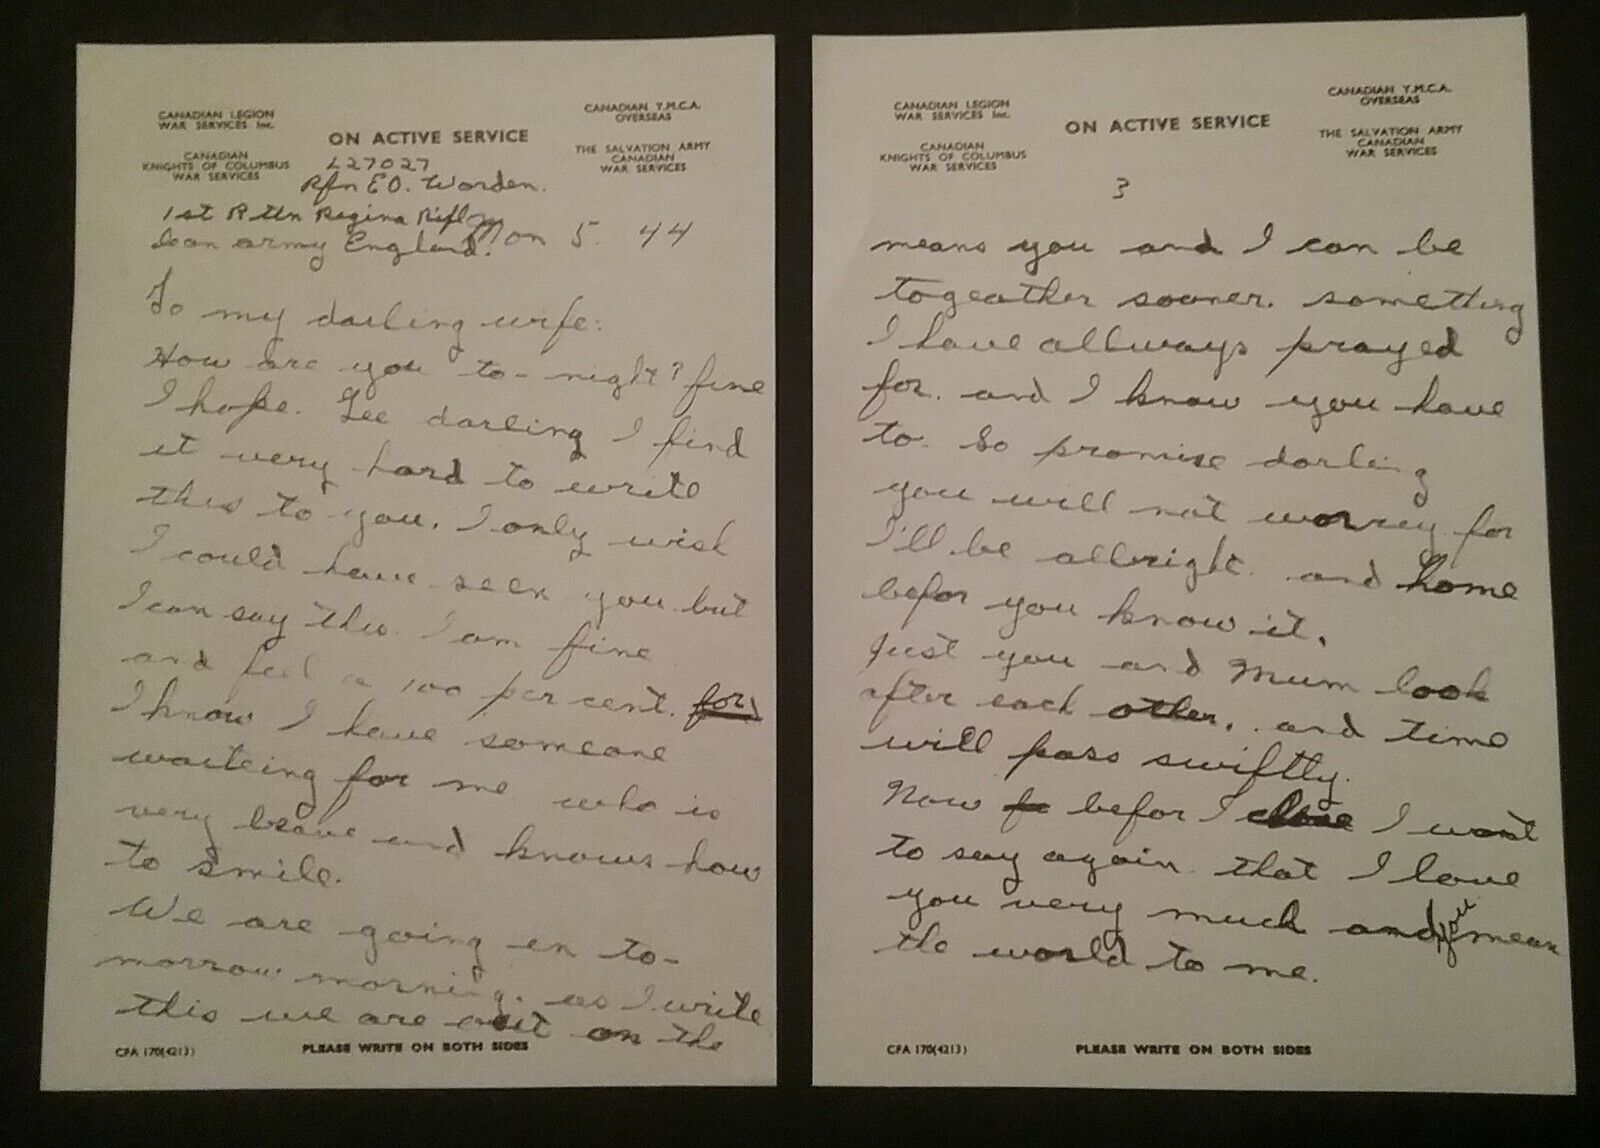 D-DAY LETTER 5/6/44 WRITTEN FROM CANADIAN LANCE SERGEANT TO HIS WIFE ON THE BOAT